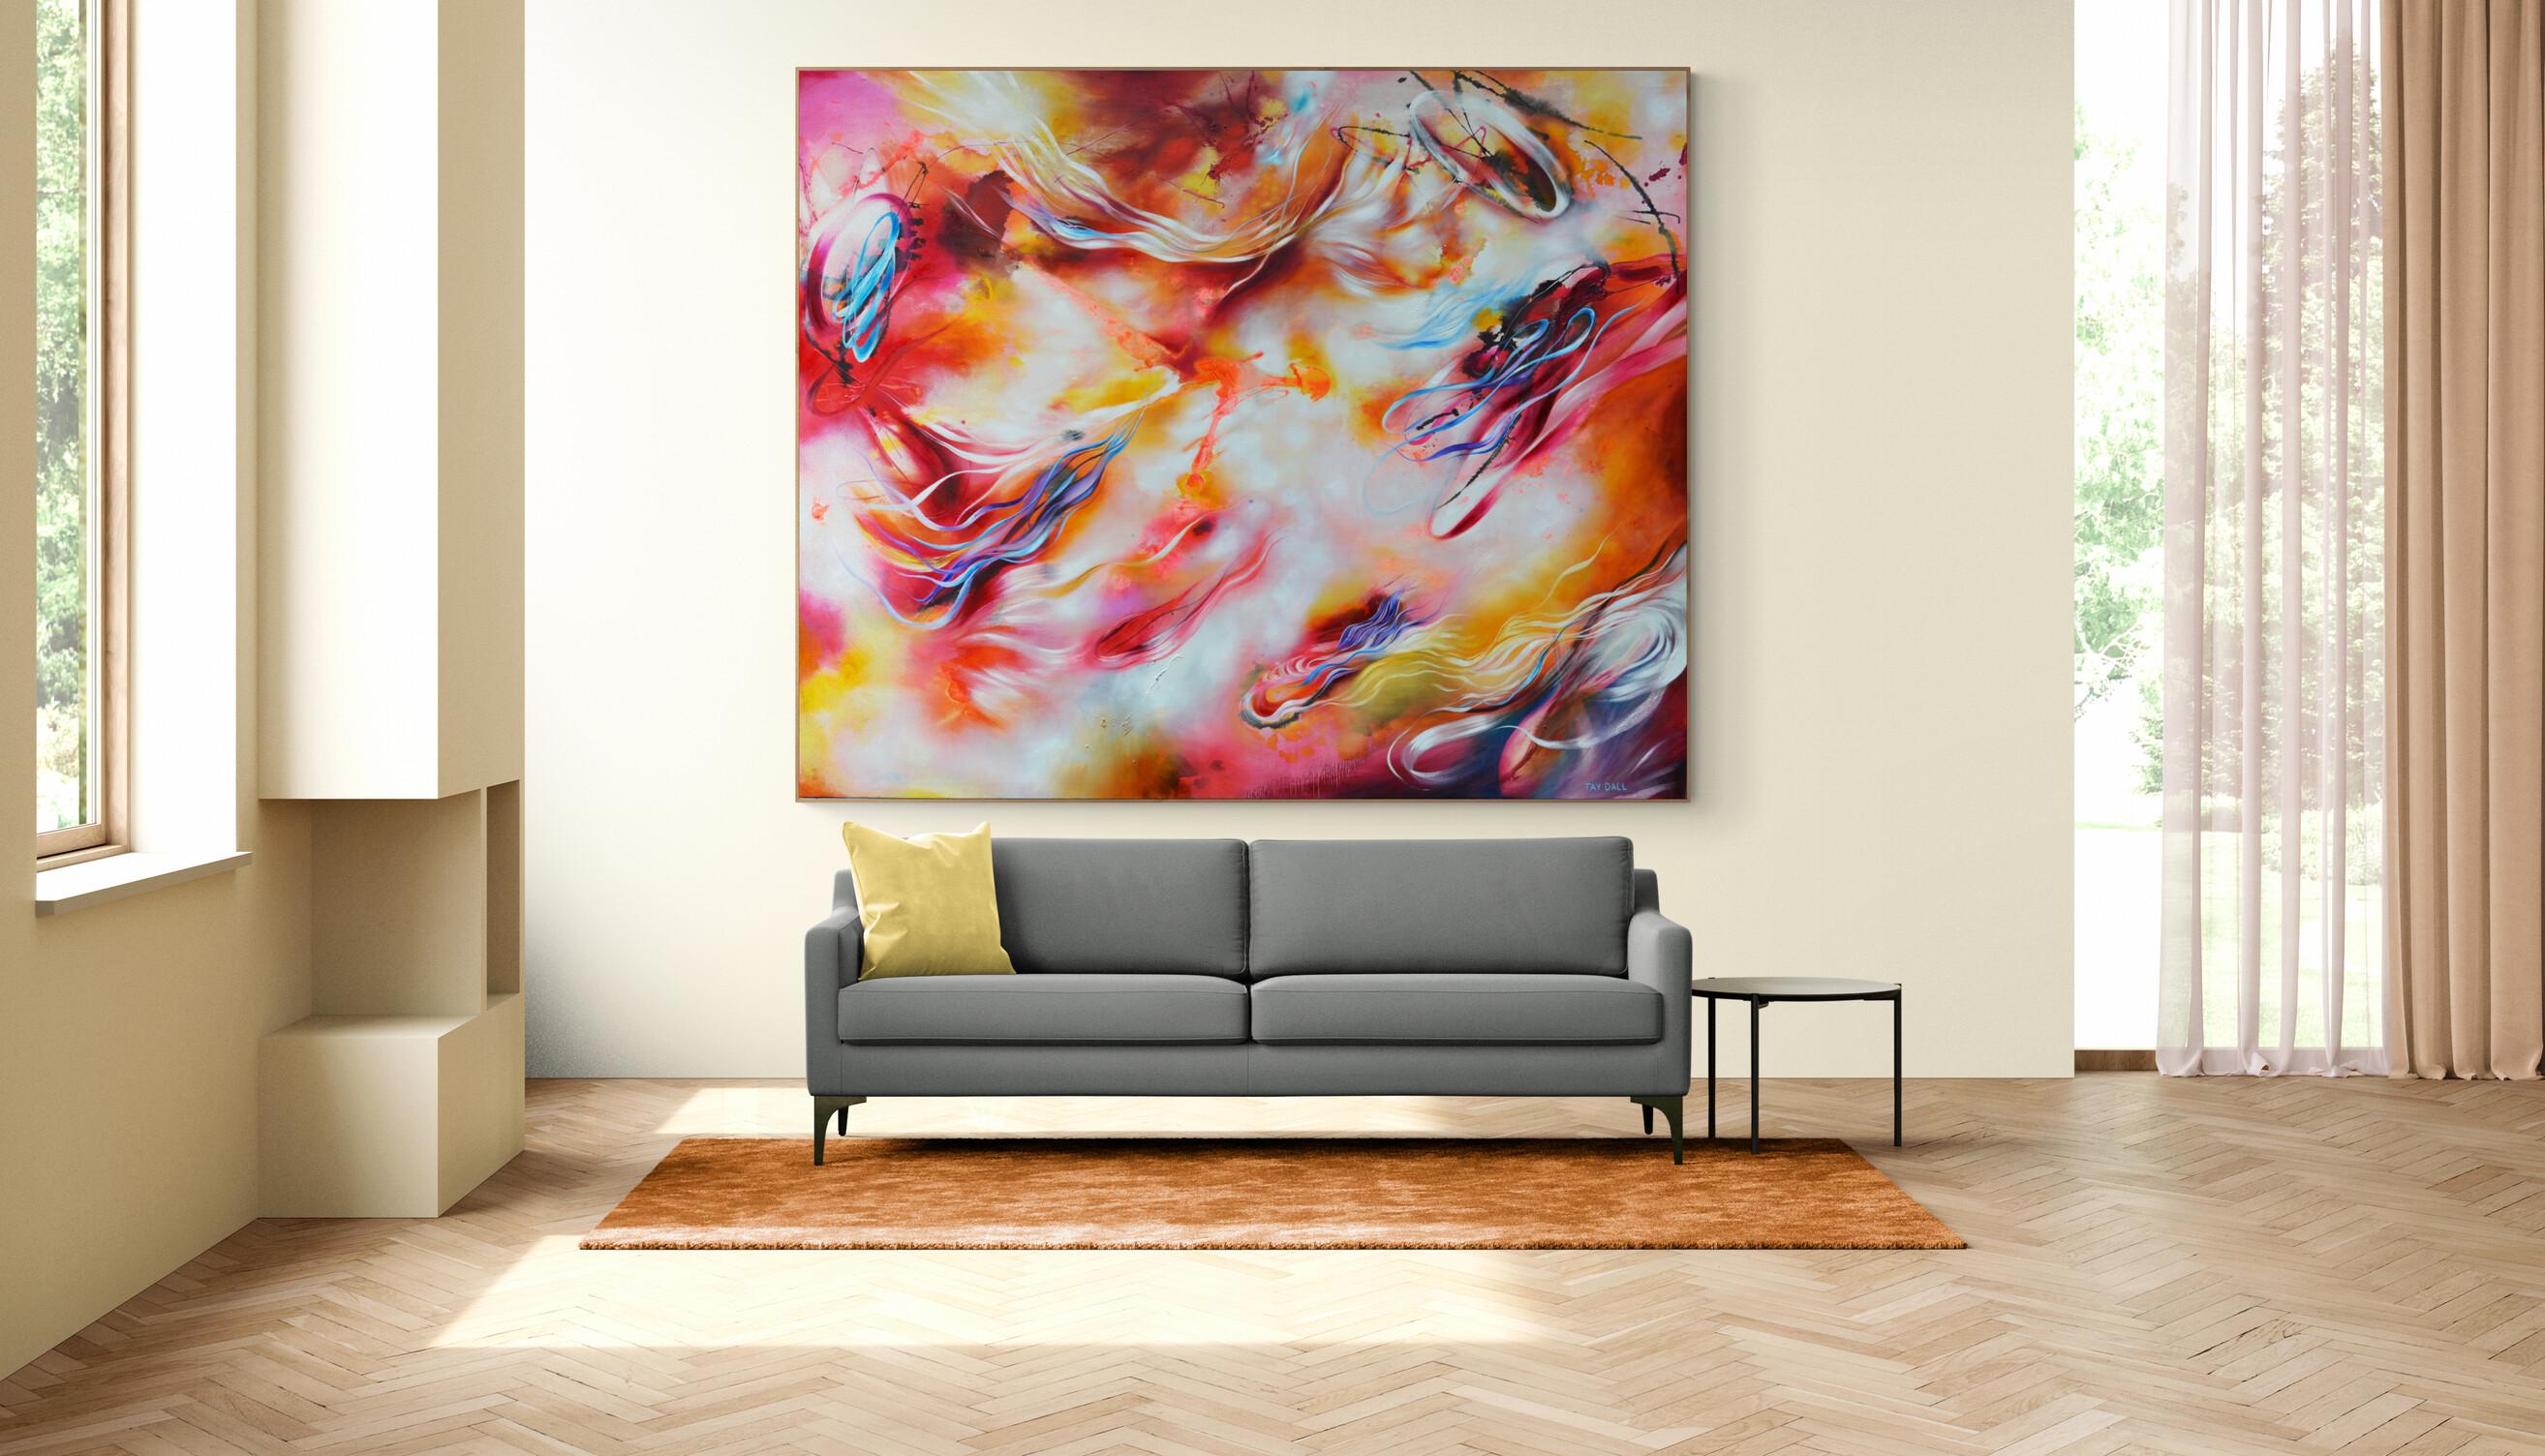 An extra large, oversized, unique and vivid oil painting on stretched canvas, with flowy, surreal pink, yellow, and blue/purple shapes. Ready to hang. 
Framing on request.
FREE SHIPPING